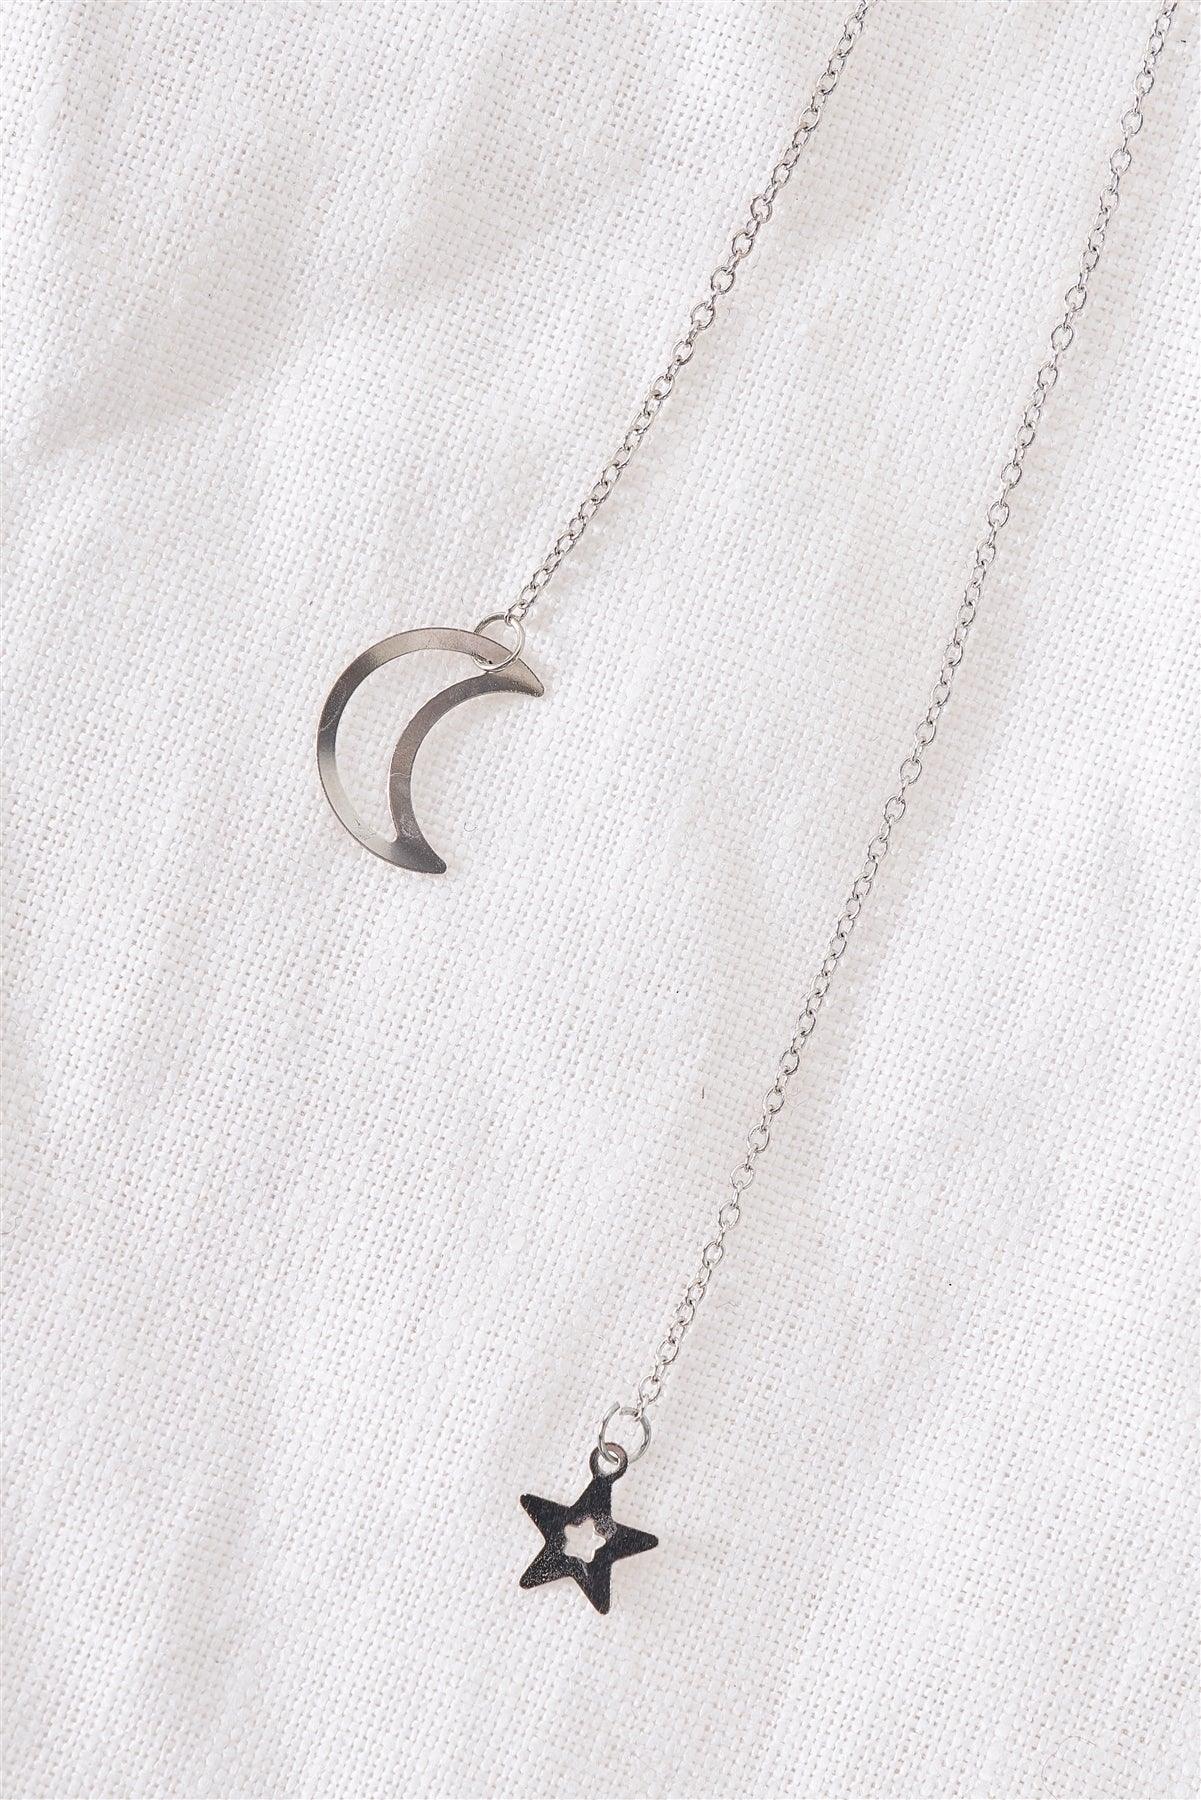 Silver Moon & Star Chain Open Necklace / 3 Pieces